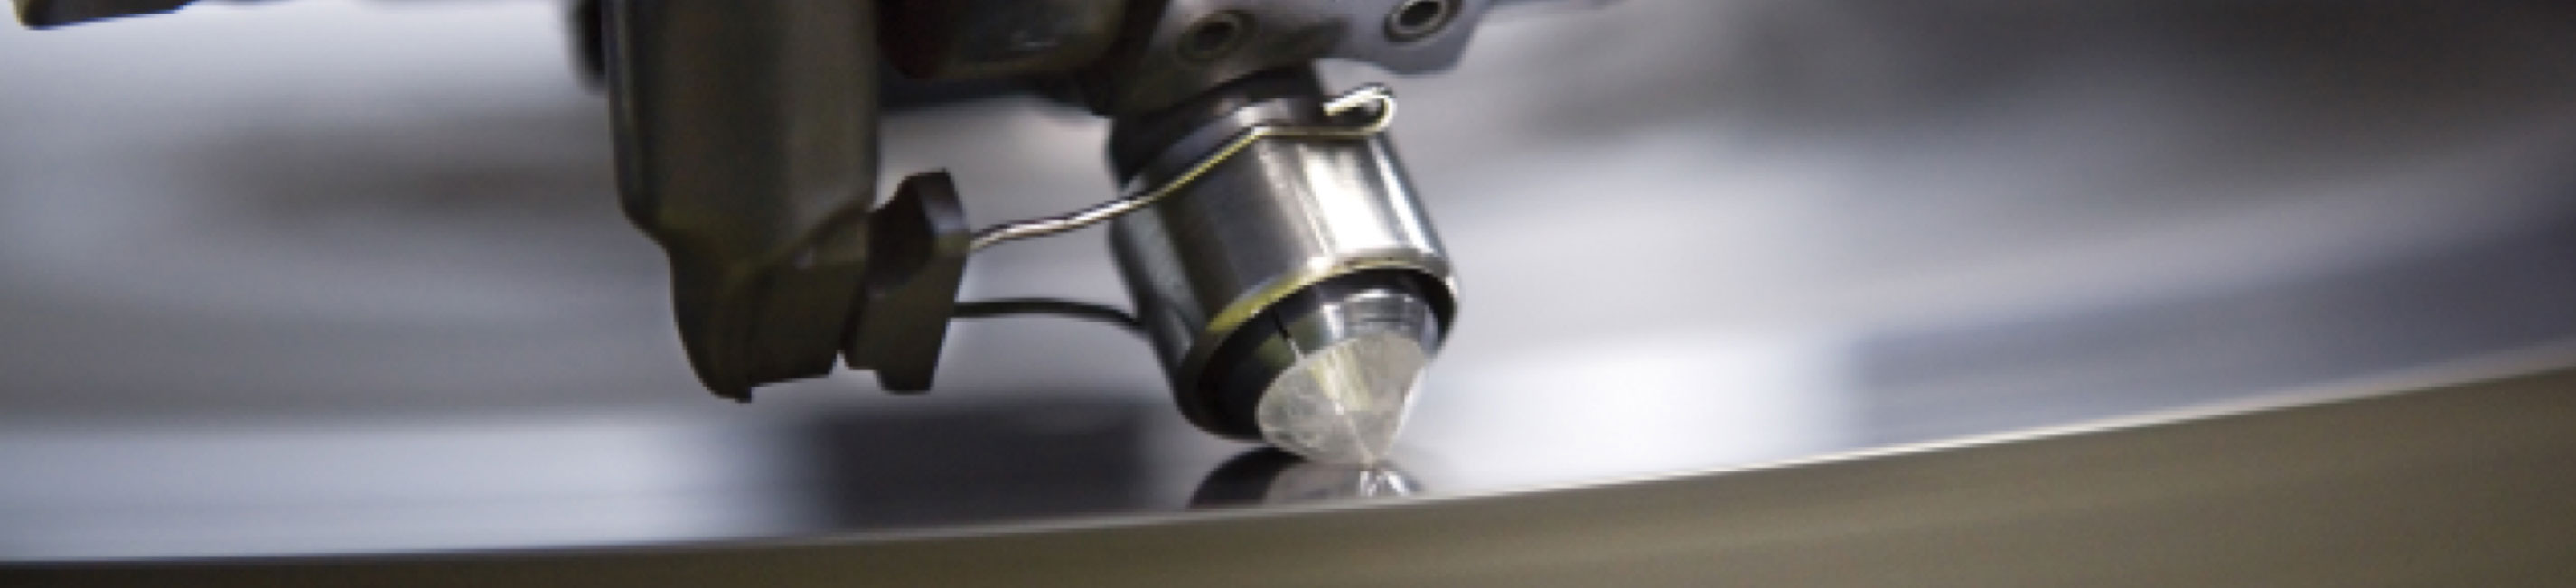 A rough diamond being facetted on a polishing wheel.